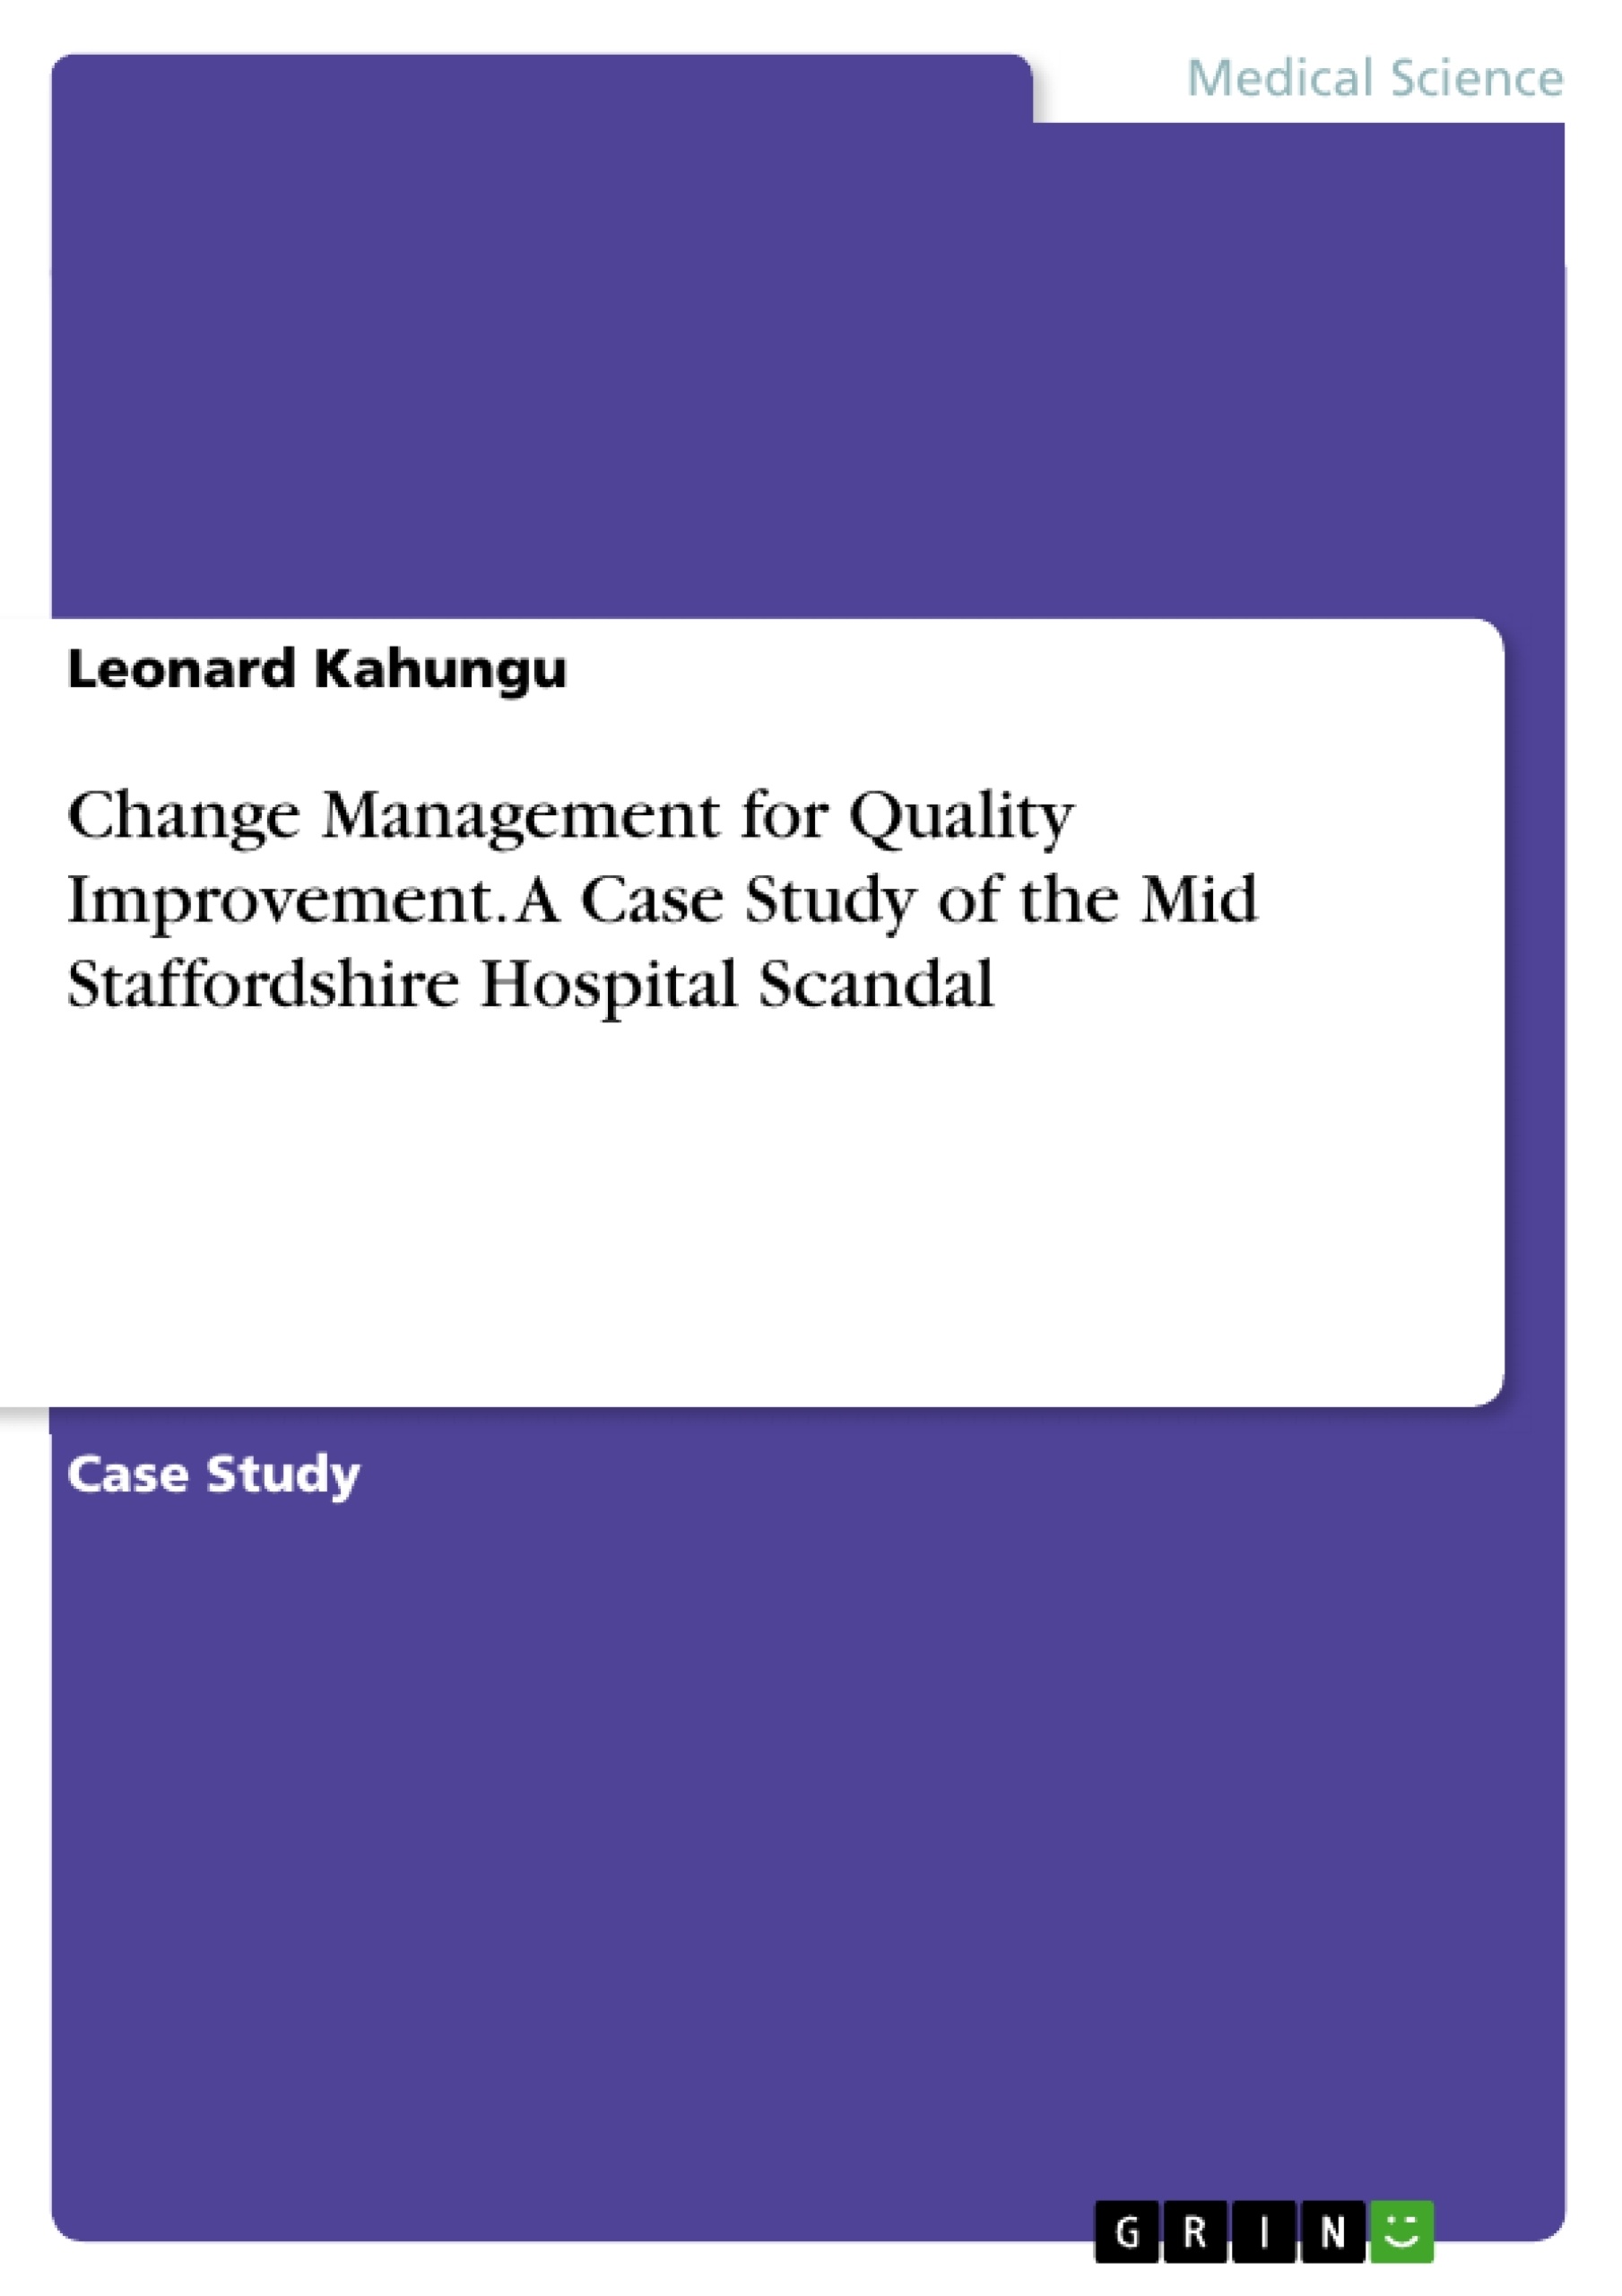 Titre: Change Management for Quality Improvement. A Case Study of the Mid Staffordshire Hospital Scandal